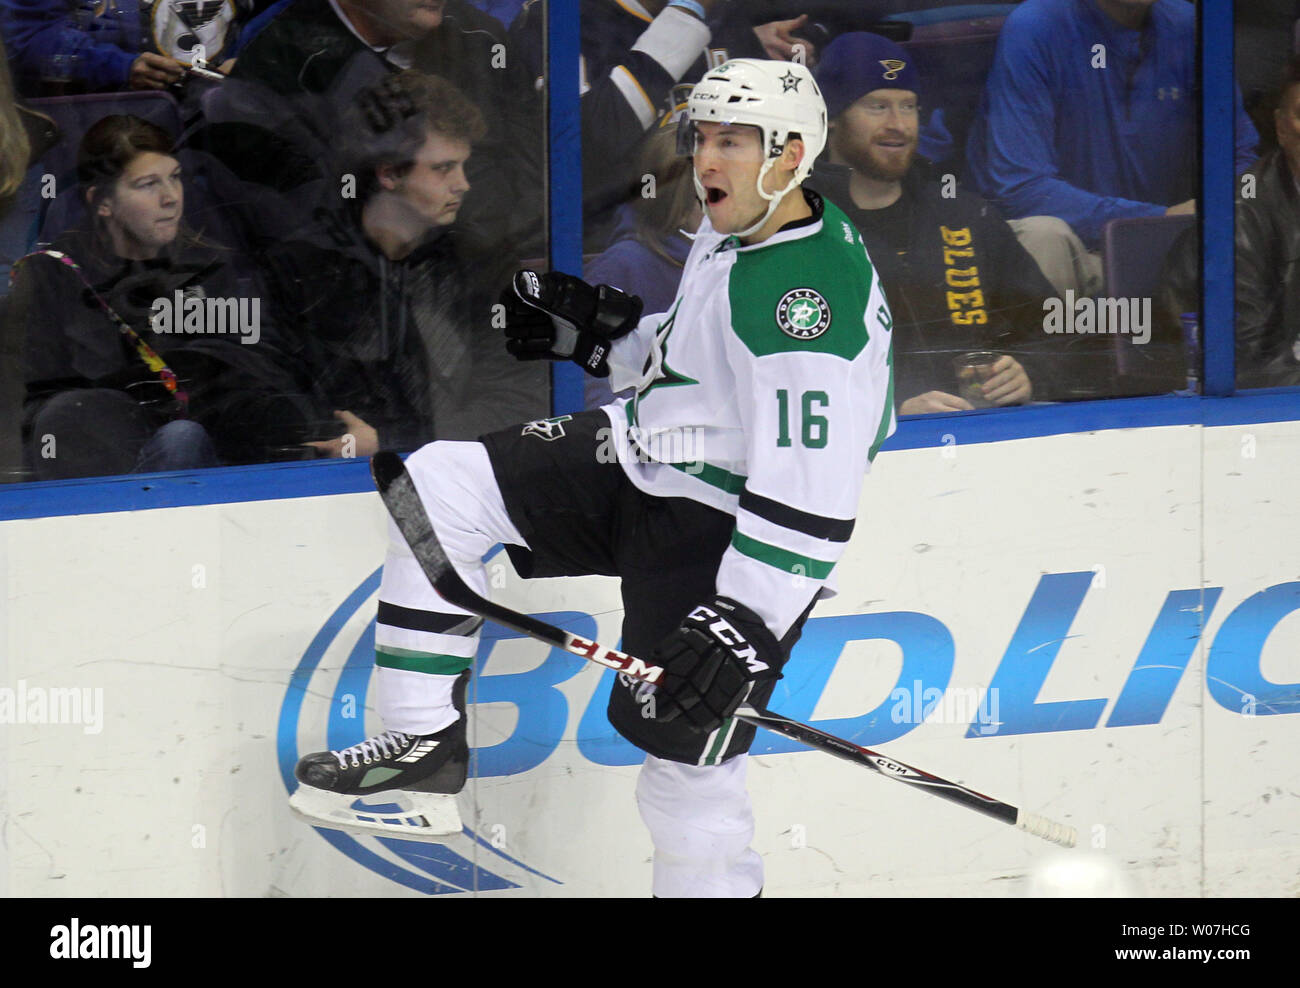 Dallas Stars Ryan Garbutt celebrates his first period goal against the St. Louis Blues at the Scottrade Center in St. Louis on December 27, 2014. Dallas defeated St. Louis 4-3. UPI/Bill Greenblatt Stock Photo